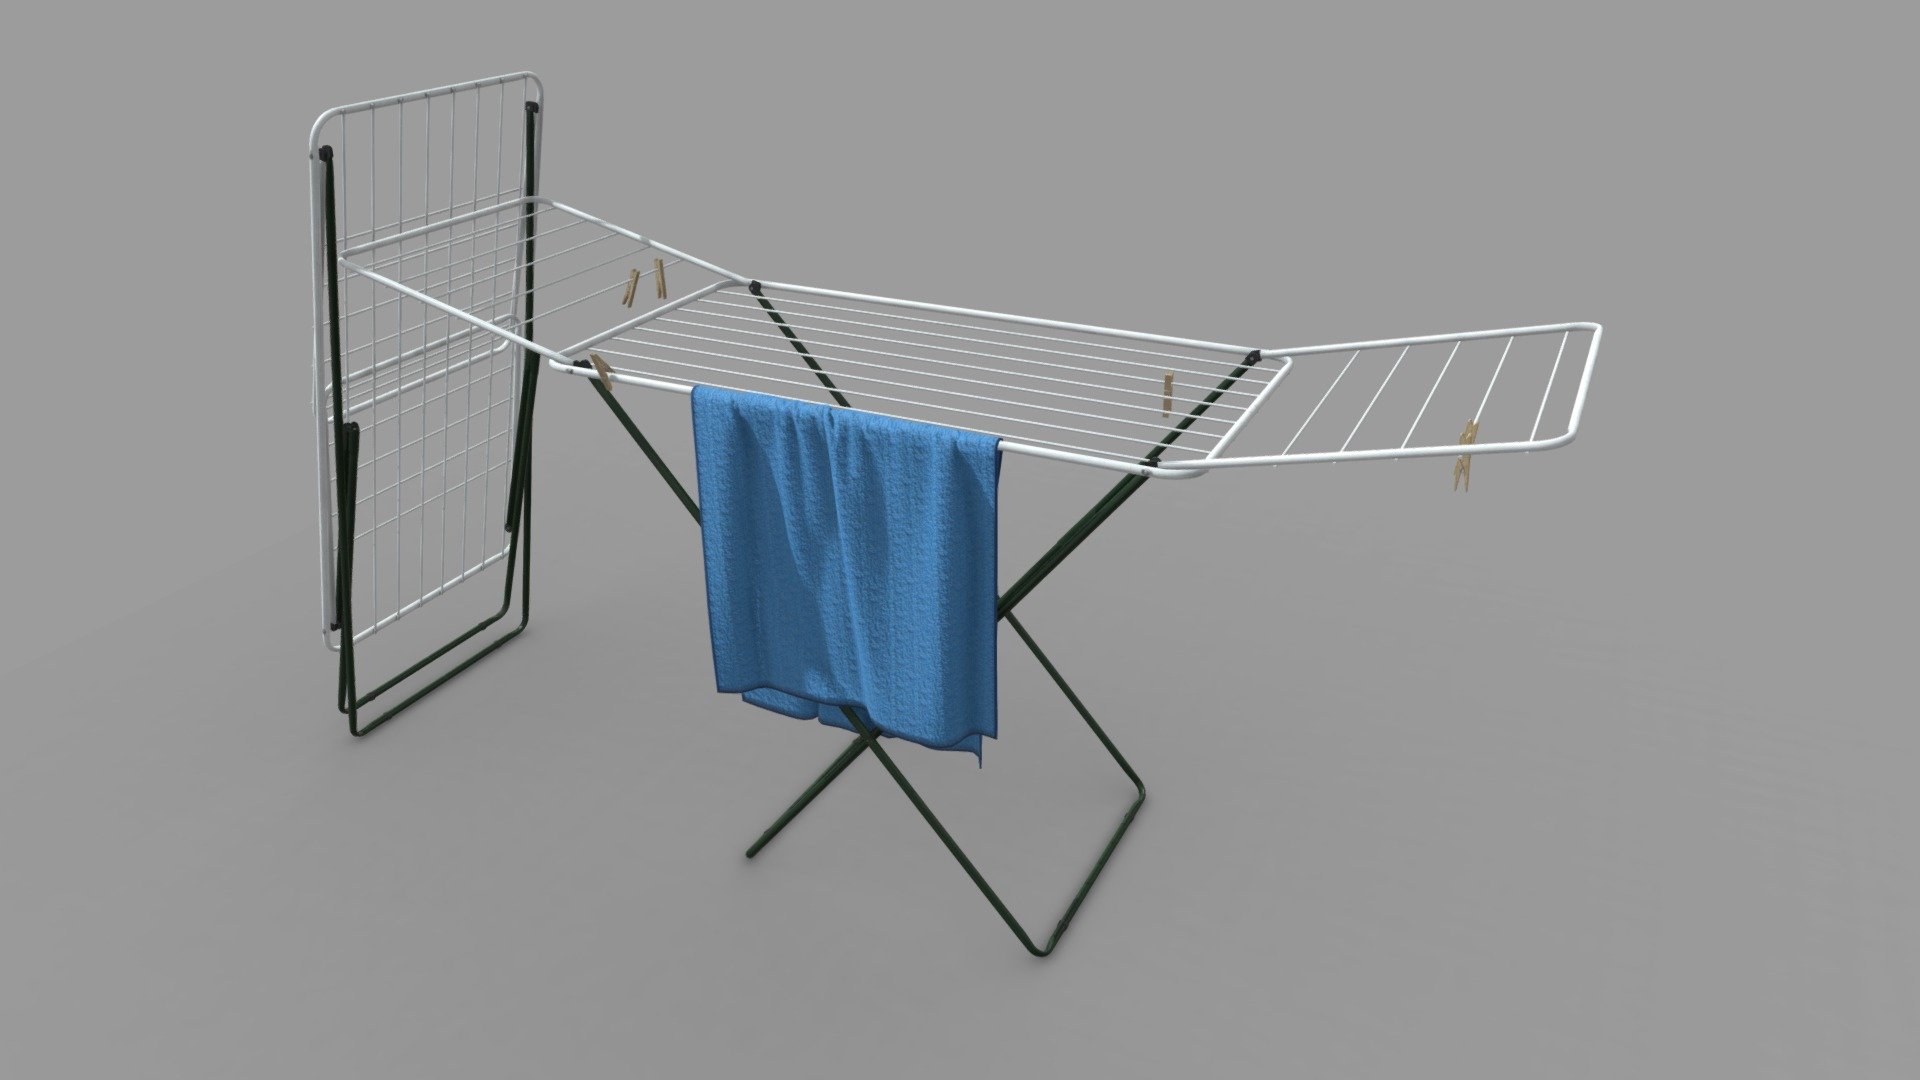 Laundry drying rack with a towel and wooden clips/pegs.

Rack has a folded version aswell.

Towel is simulated, and can be subdivided for cleaner look.
Clips have 3 shape keys - opened, halfway and closed.

wooden clips - 1 430 verts, 2 840 tris, 1K texture set
drying rack - 3 868 verts, 7  488 tris, 2K texture set (UVs are overlaping for better resolution)
towel lowpoly - 6 006 verts, 12 008 tris 2K texture set

Hi poly towel version is in additional files with its own textures. This hipoly was used to bake normals for lowpoly.
towel hipoly - 86 436 verts, 172 868 tris, 2K texture set

all PBR (Basecolor, Metalic, Roughness, Normal OpenGL, AO and Height)
all in png and smaller jpg

Real world scale.

Blender, Substance painter - Drying rack with a towel and wooden clips - Buy Royalty Free 3D model by vojtaklemperer 3d model